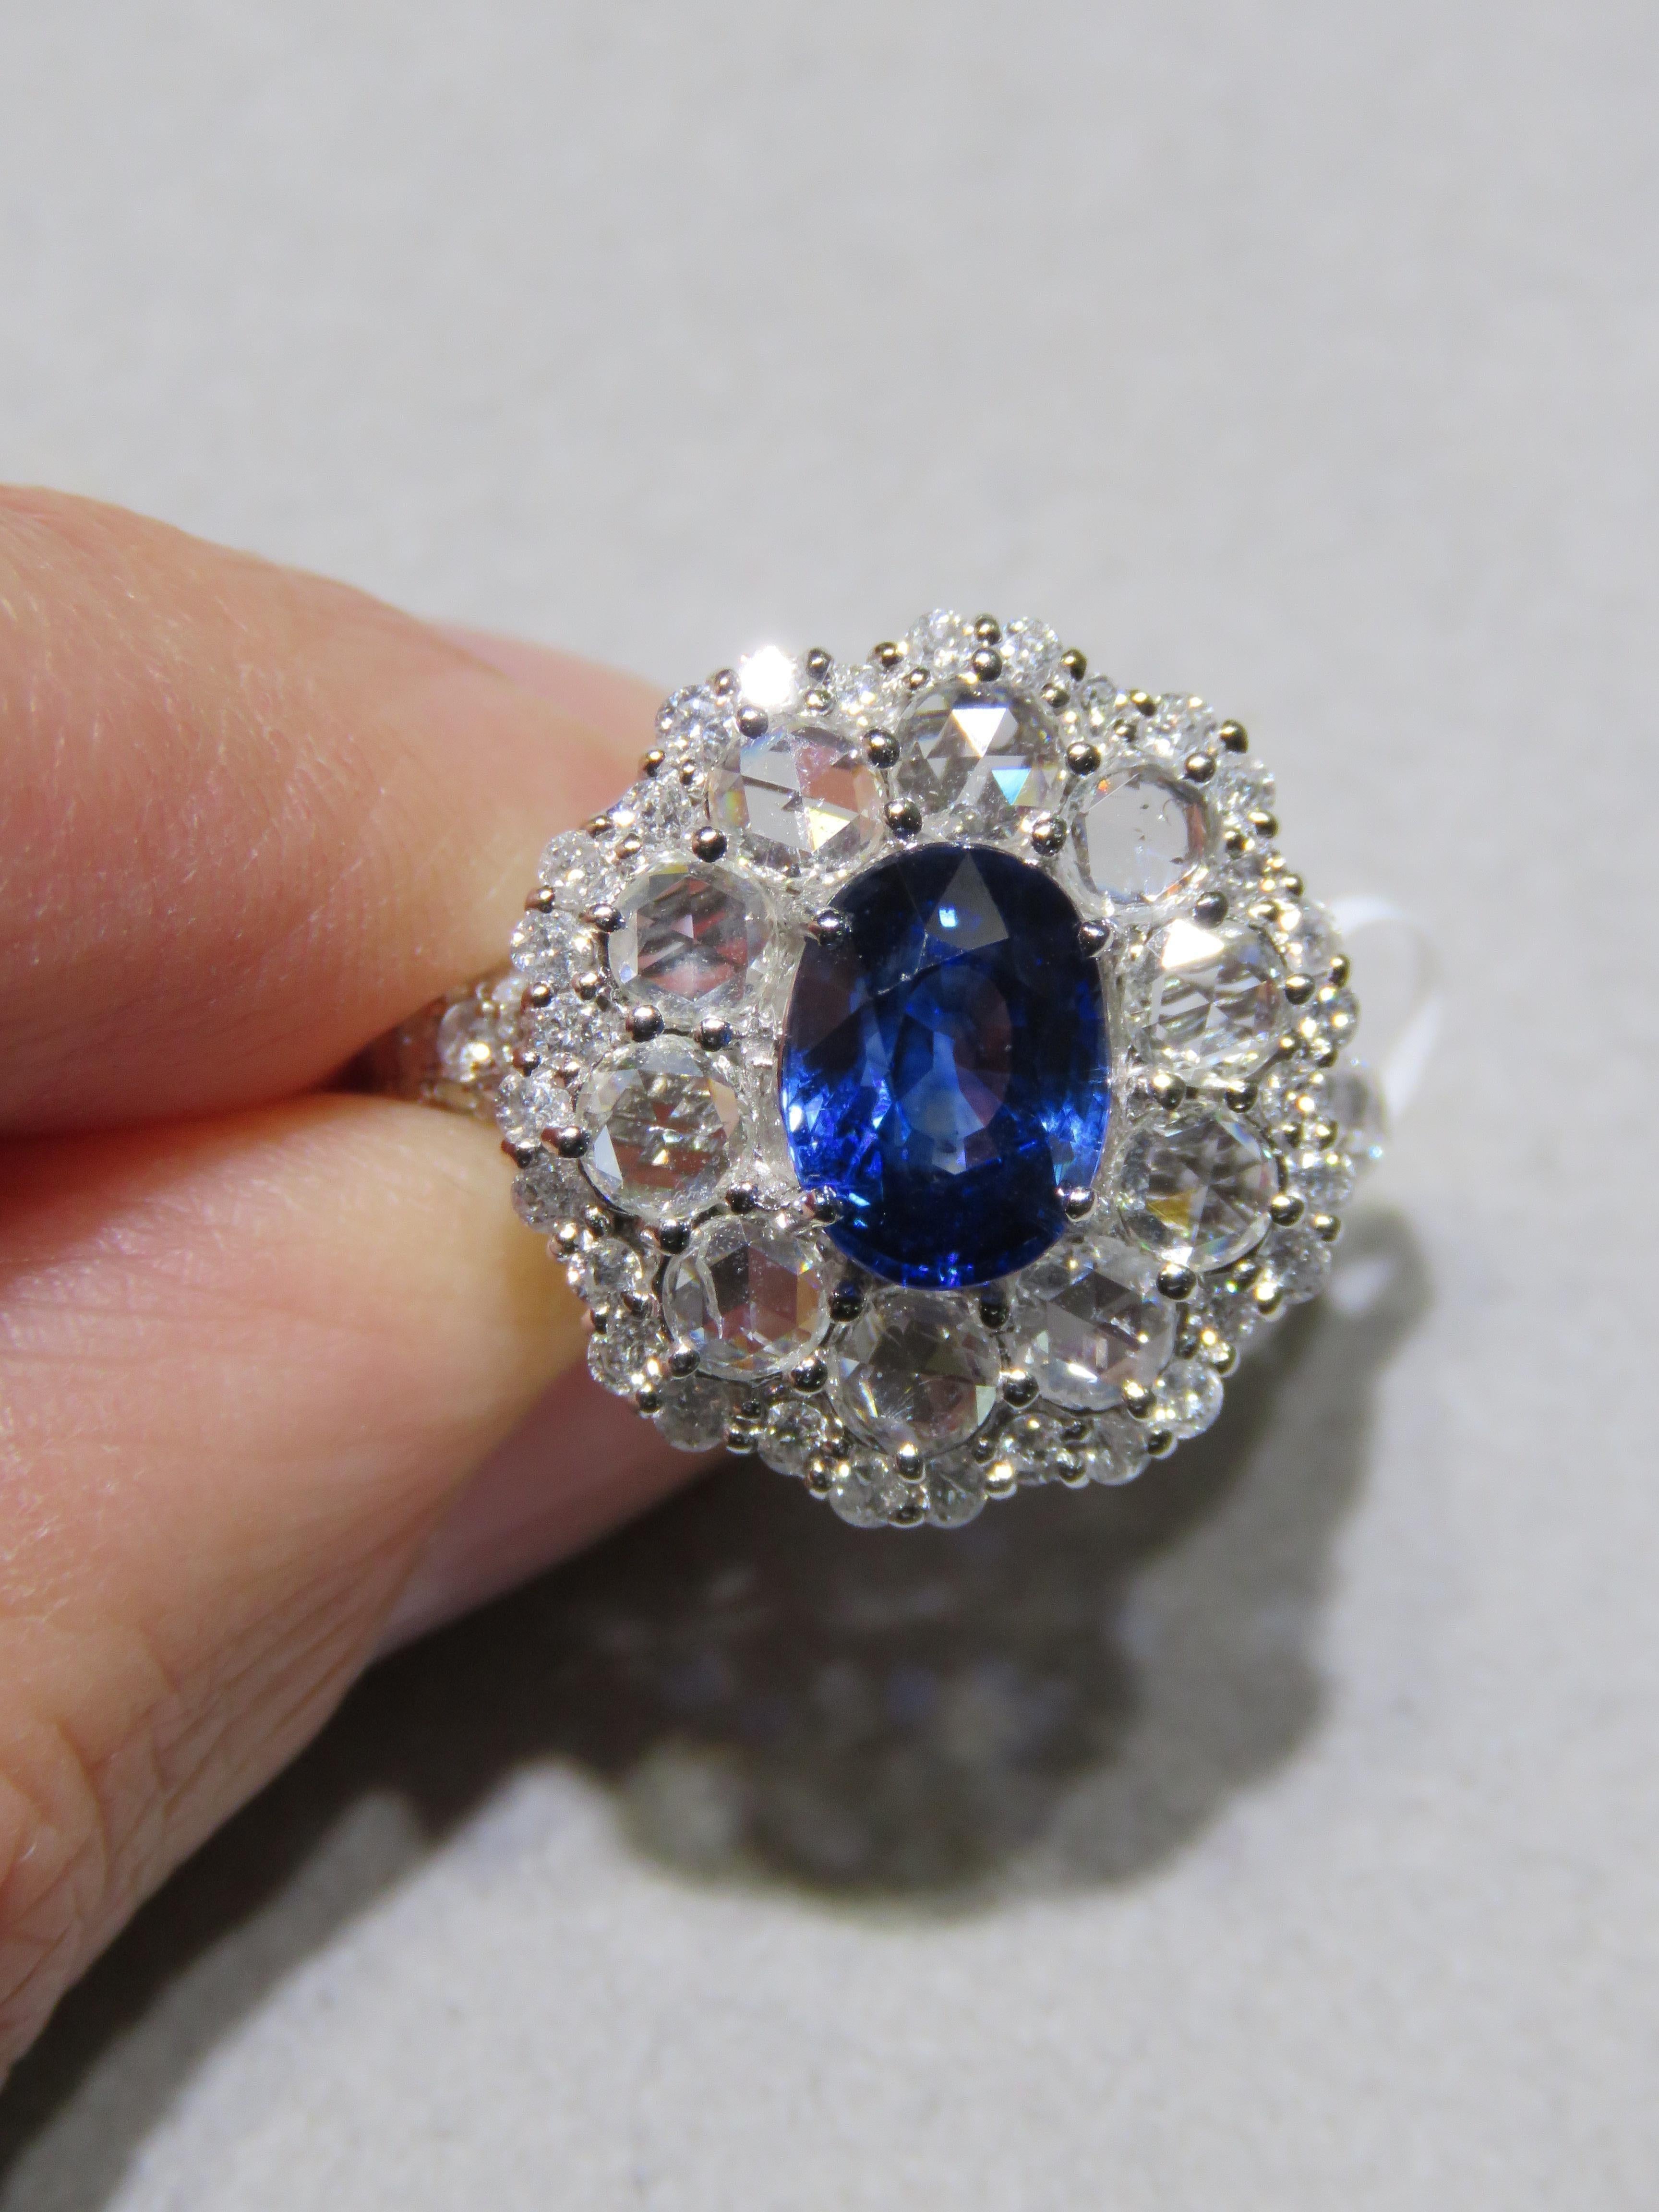 The Following Item we are offering is a Rare Important Spectacular and Brilliant 18KT Gold Large Gorgeous Sapphire Diamond Ring. Ring consists of a Rare Fine Magnificent Rare Blue Sapphire surrounded with Glittering Rose Cut Diamonds. T.C.W. Approx